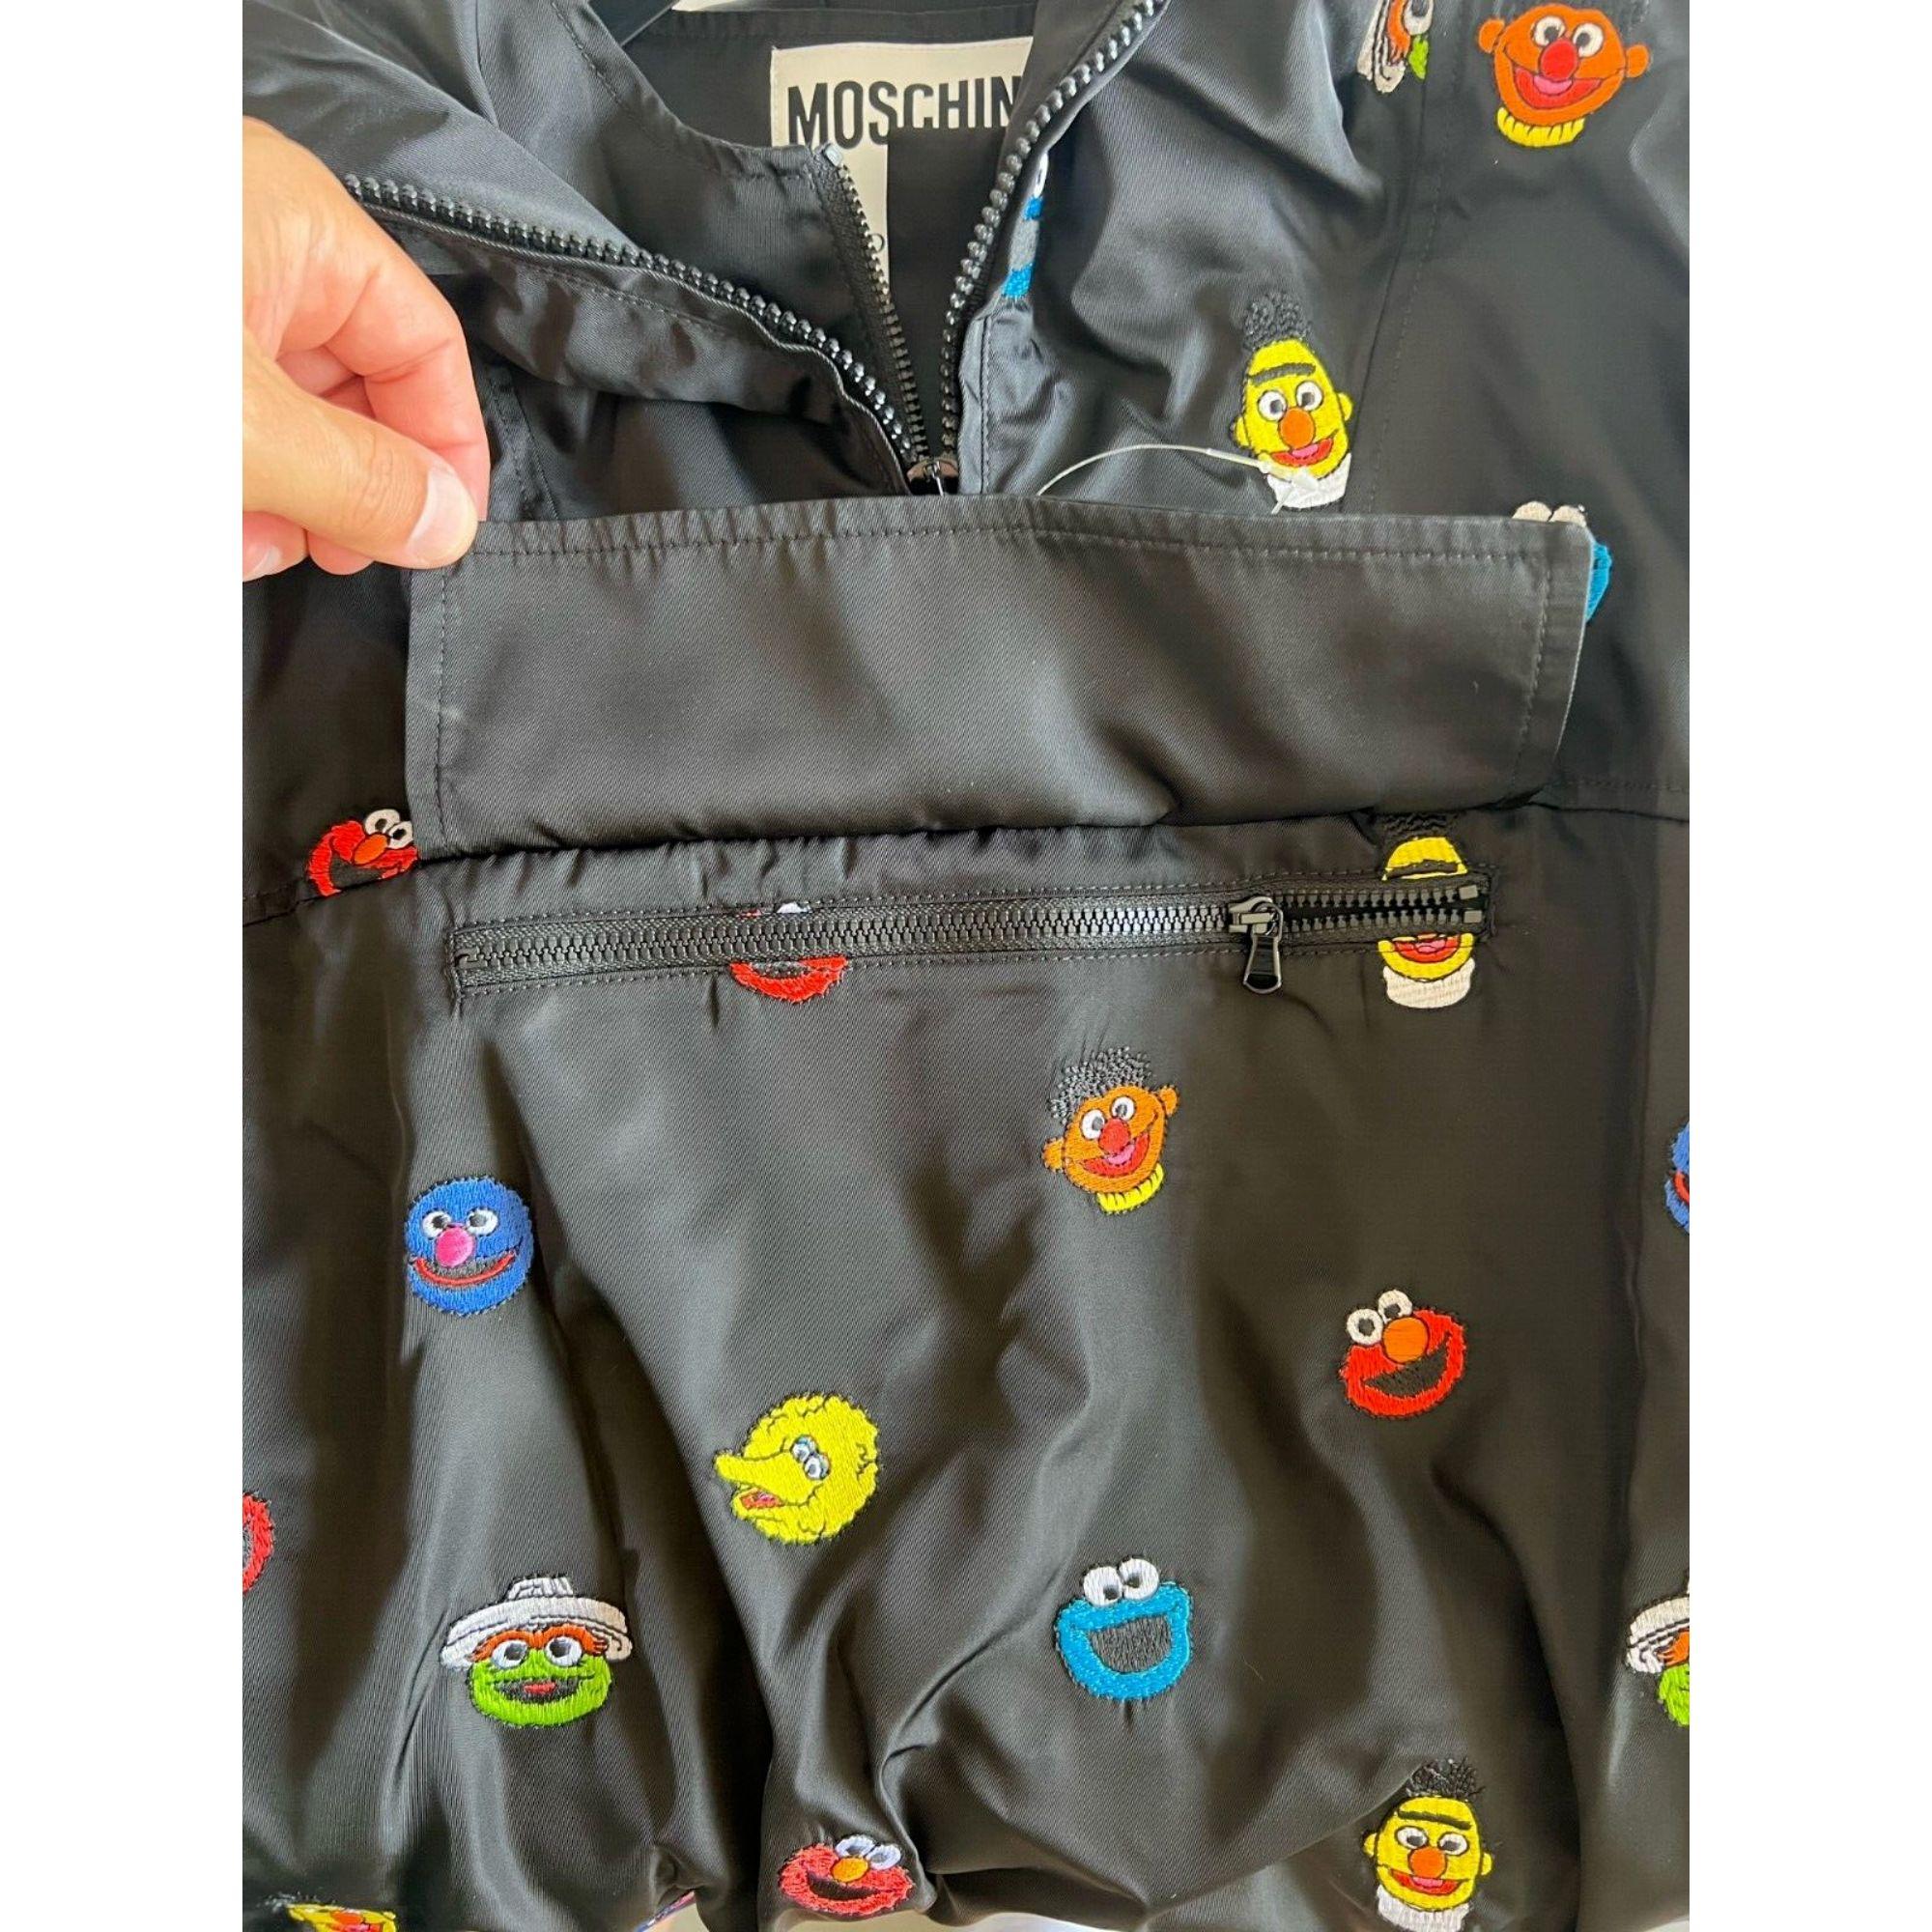 AW21 Moschino Couture Sesame Street Embroidered Hooded Jacket by Jeremy Scott For Sale 9